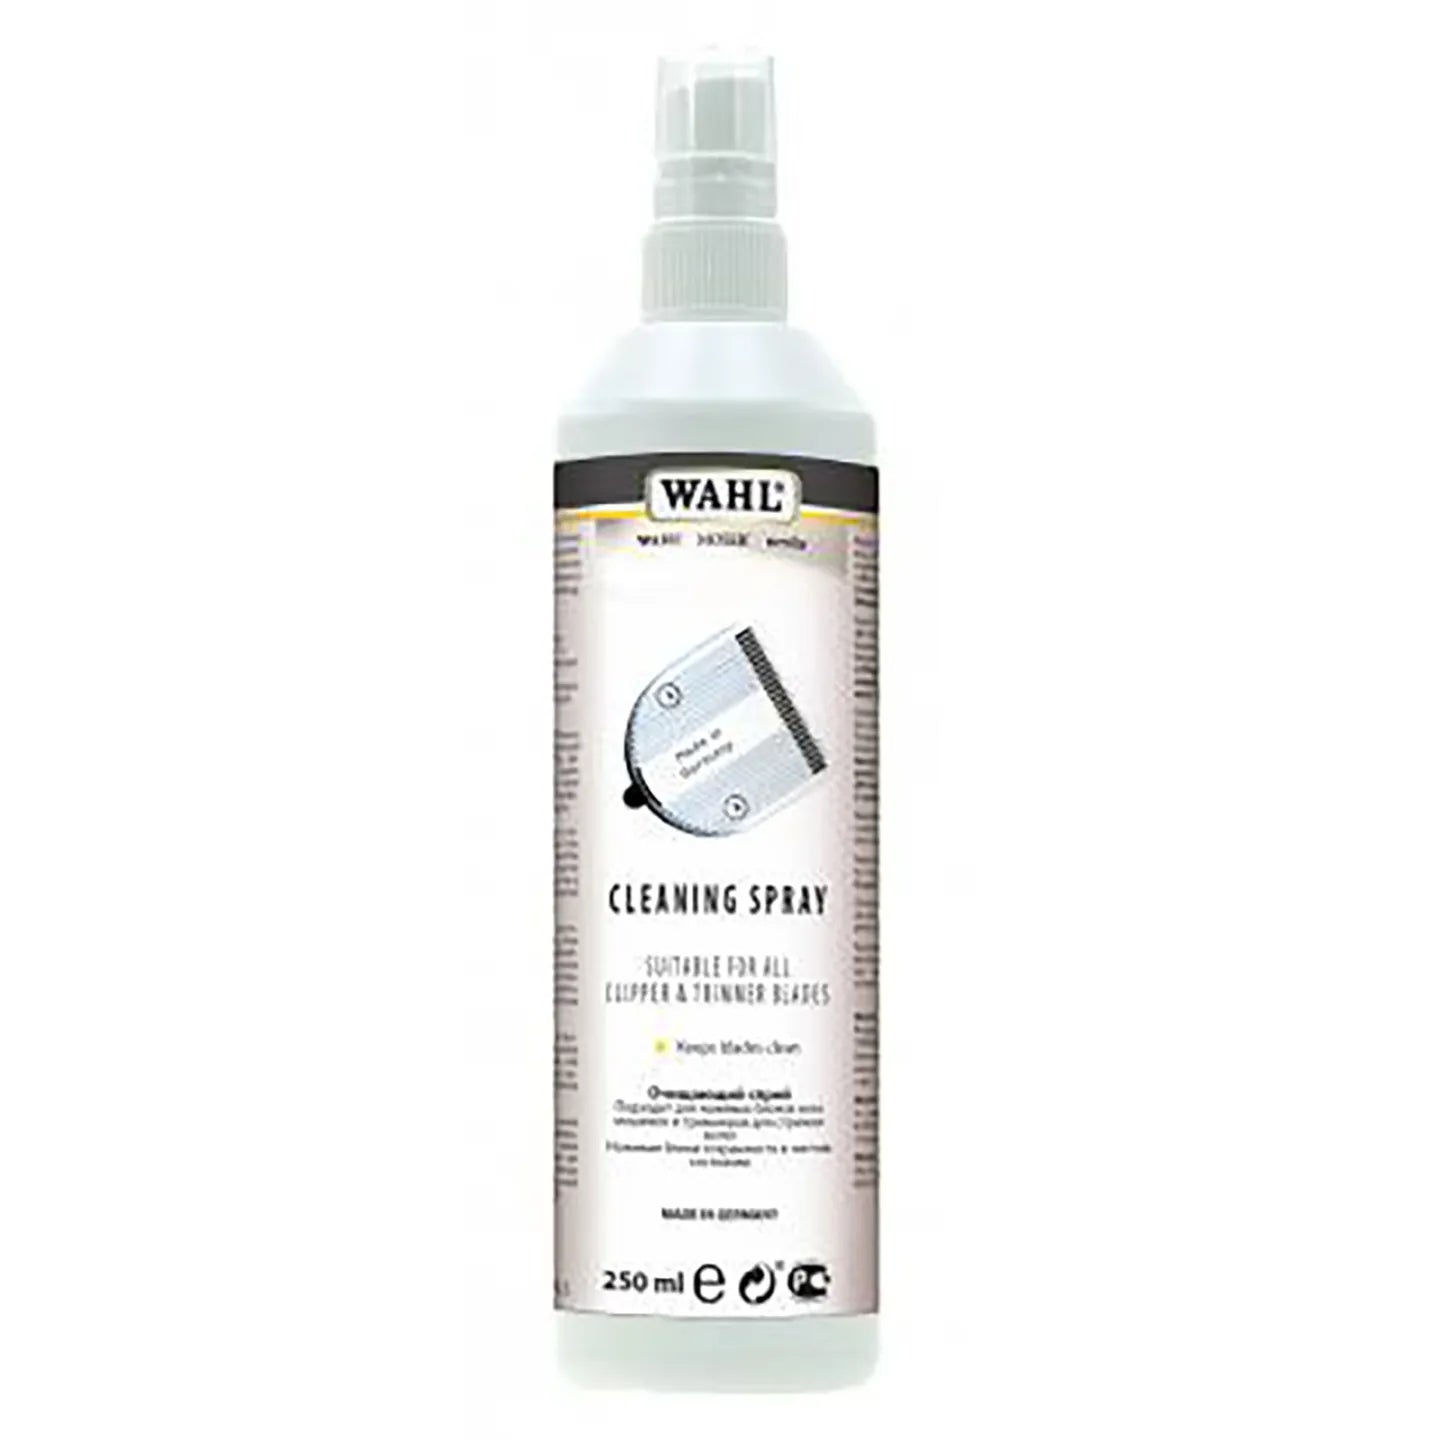 Wahl --CLEANING SPRAY 200ml